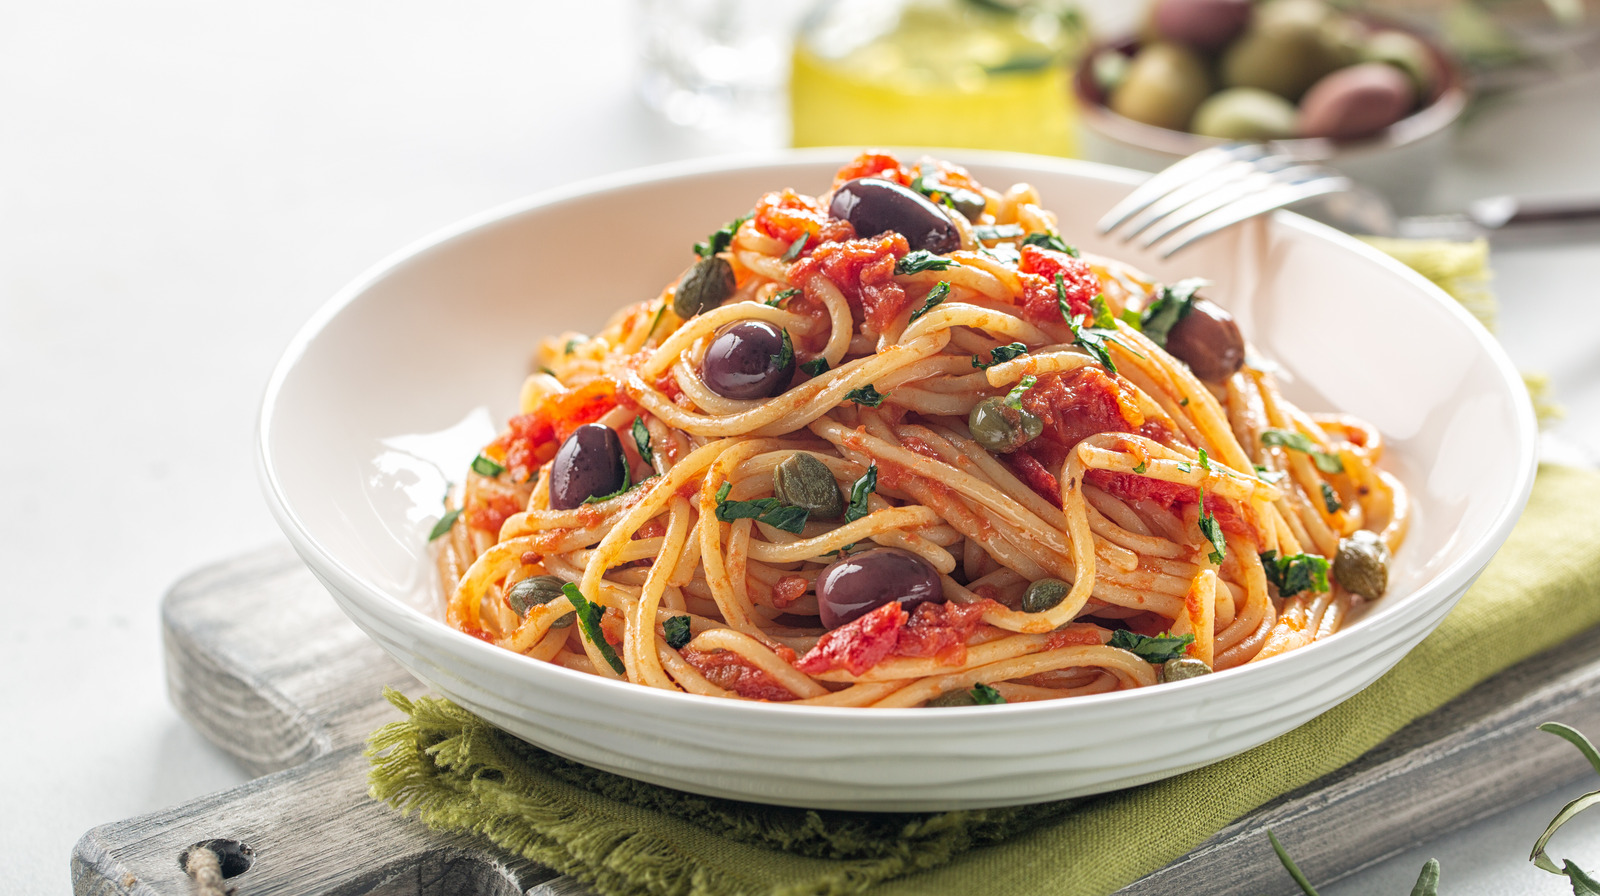 Pasta la vista! Food fans debate which form of Italian staple they couldn't  part with - vote for YOUR favourite in our poll